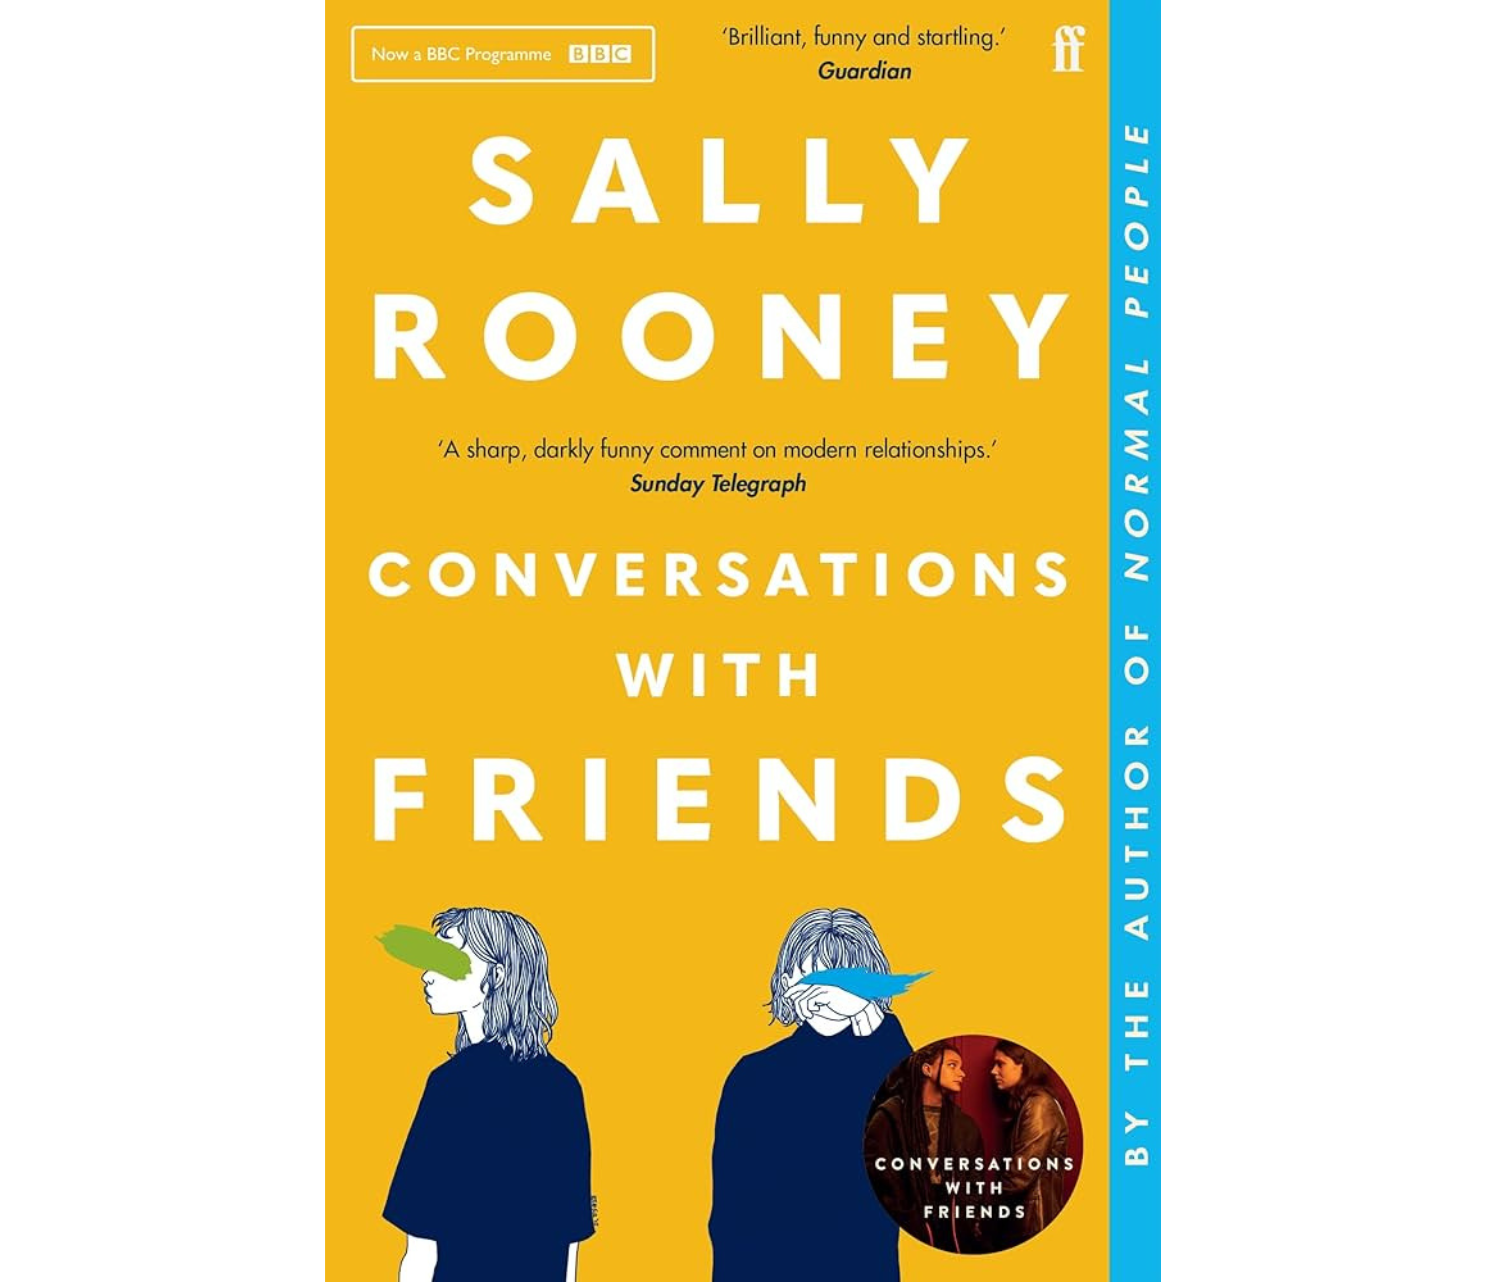 conversations with friends by Sally Rooney